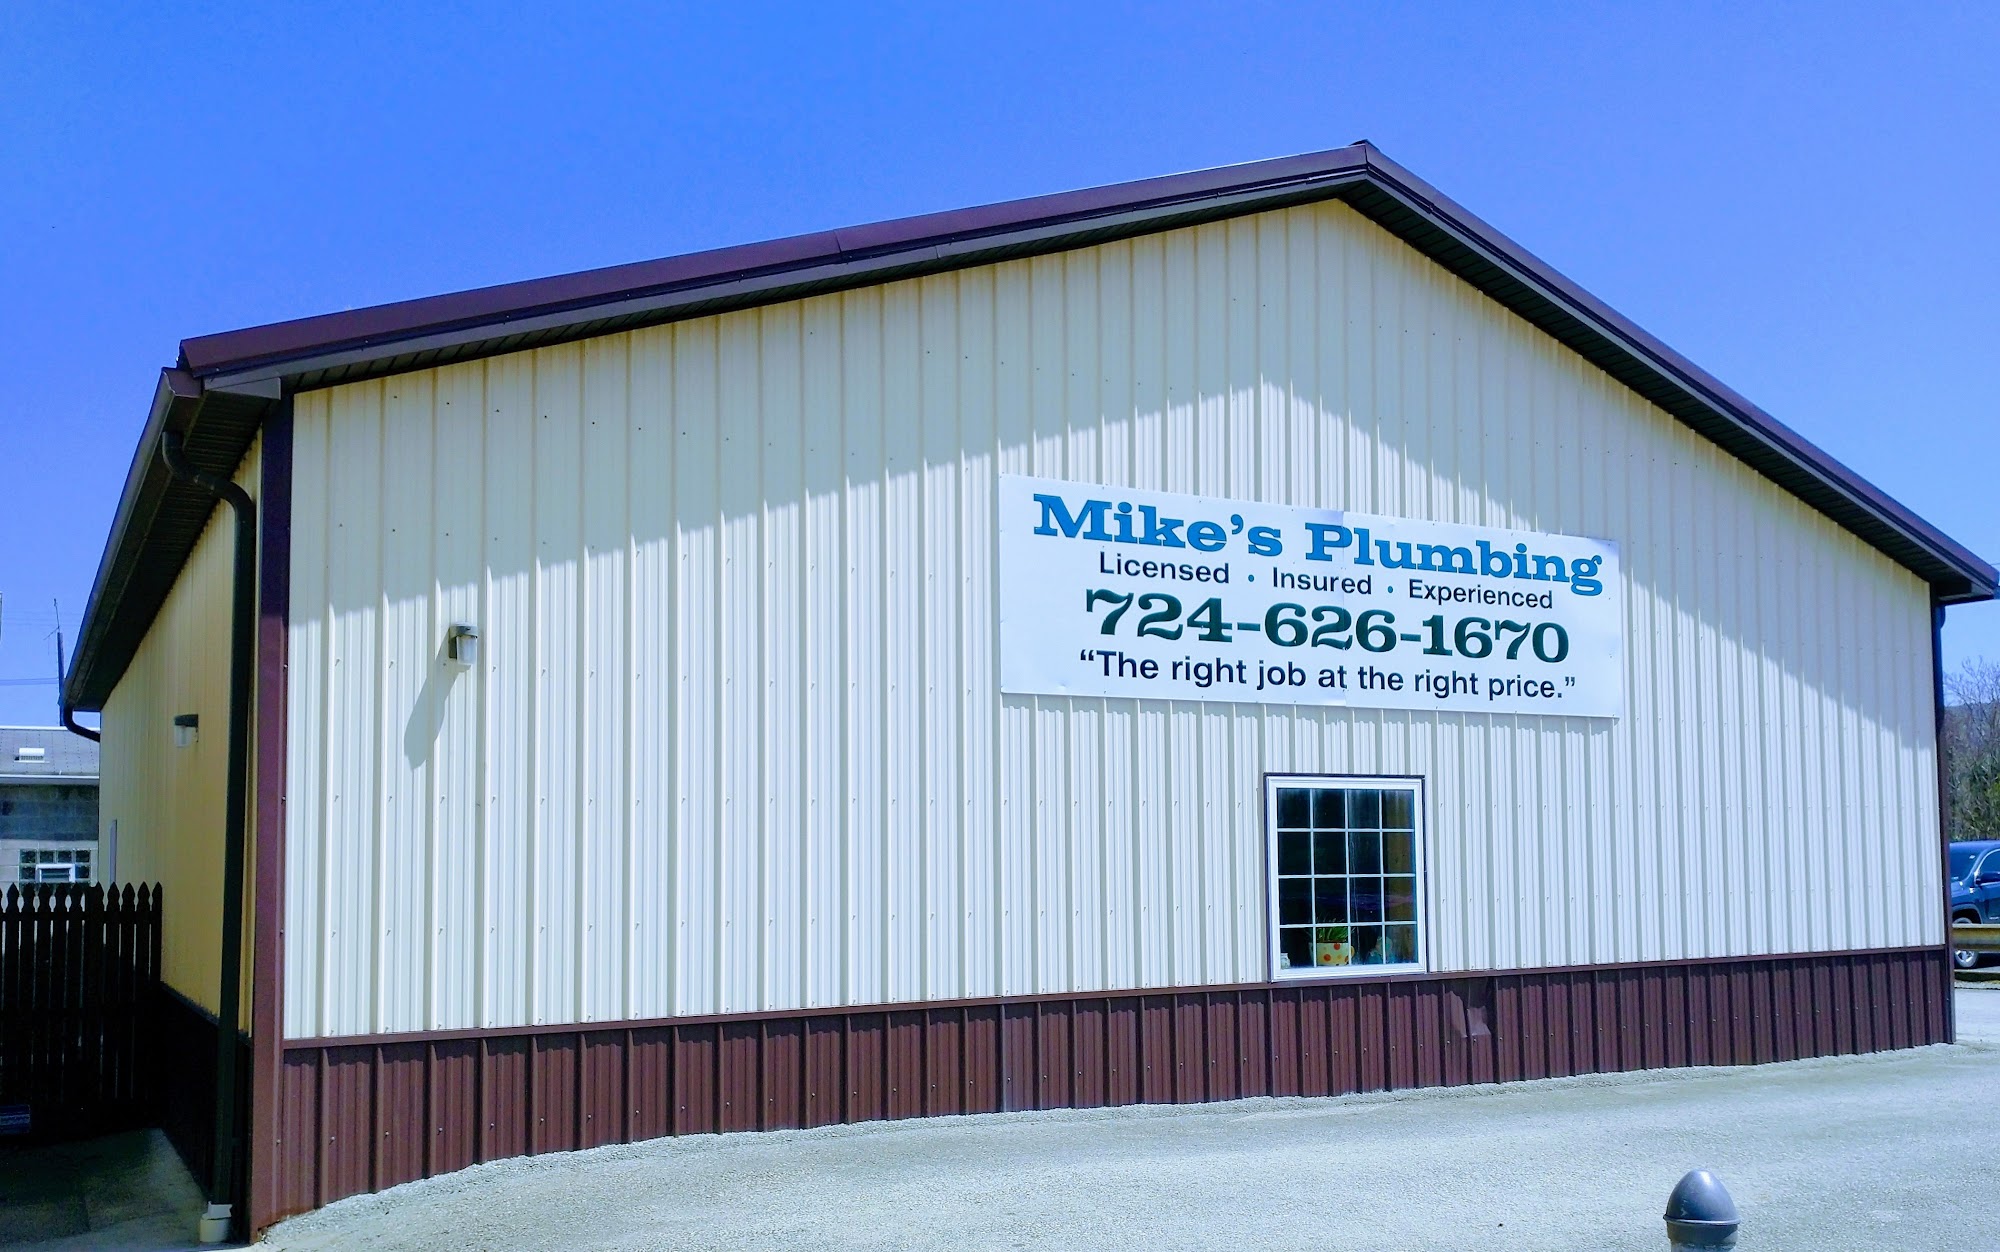 Mike's Plumbing 107 S 8th St, Connellsville Pennsylvania 15425